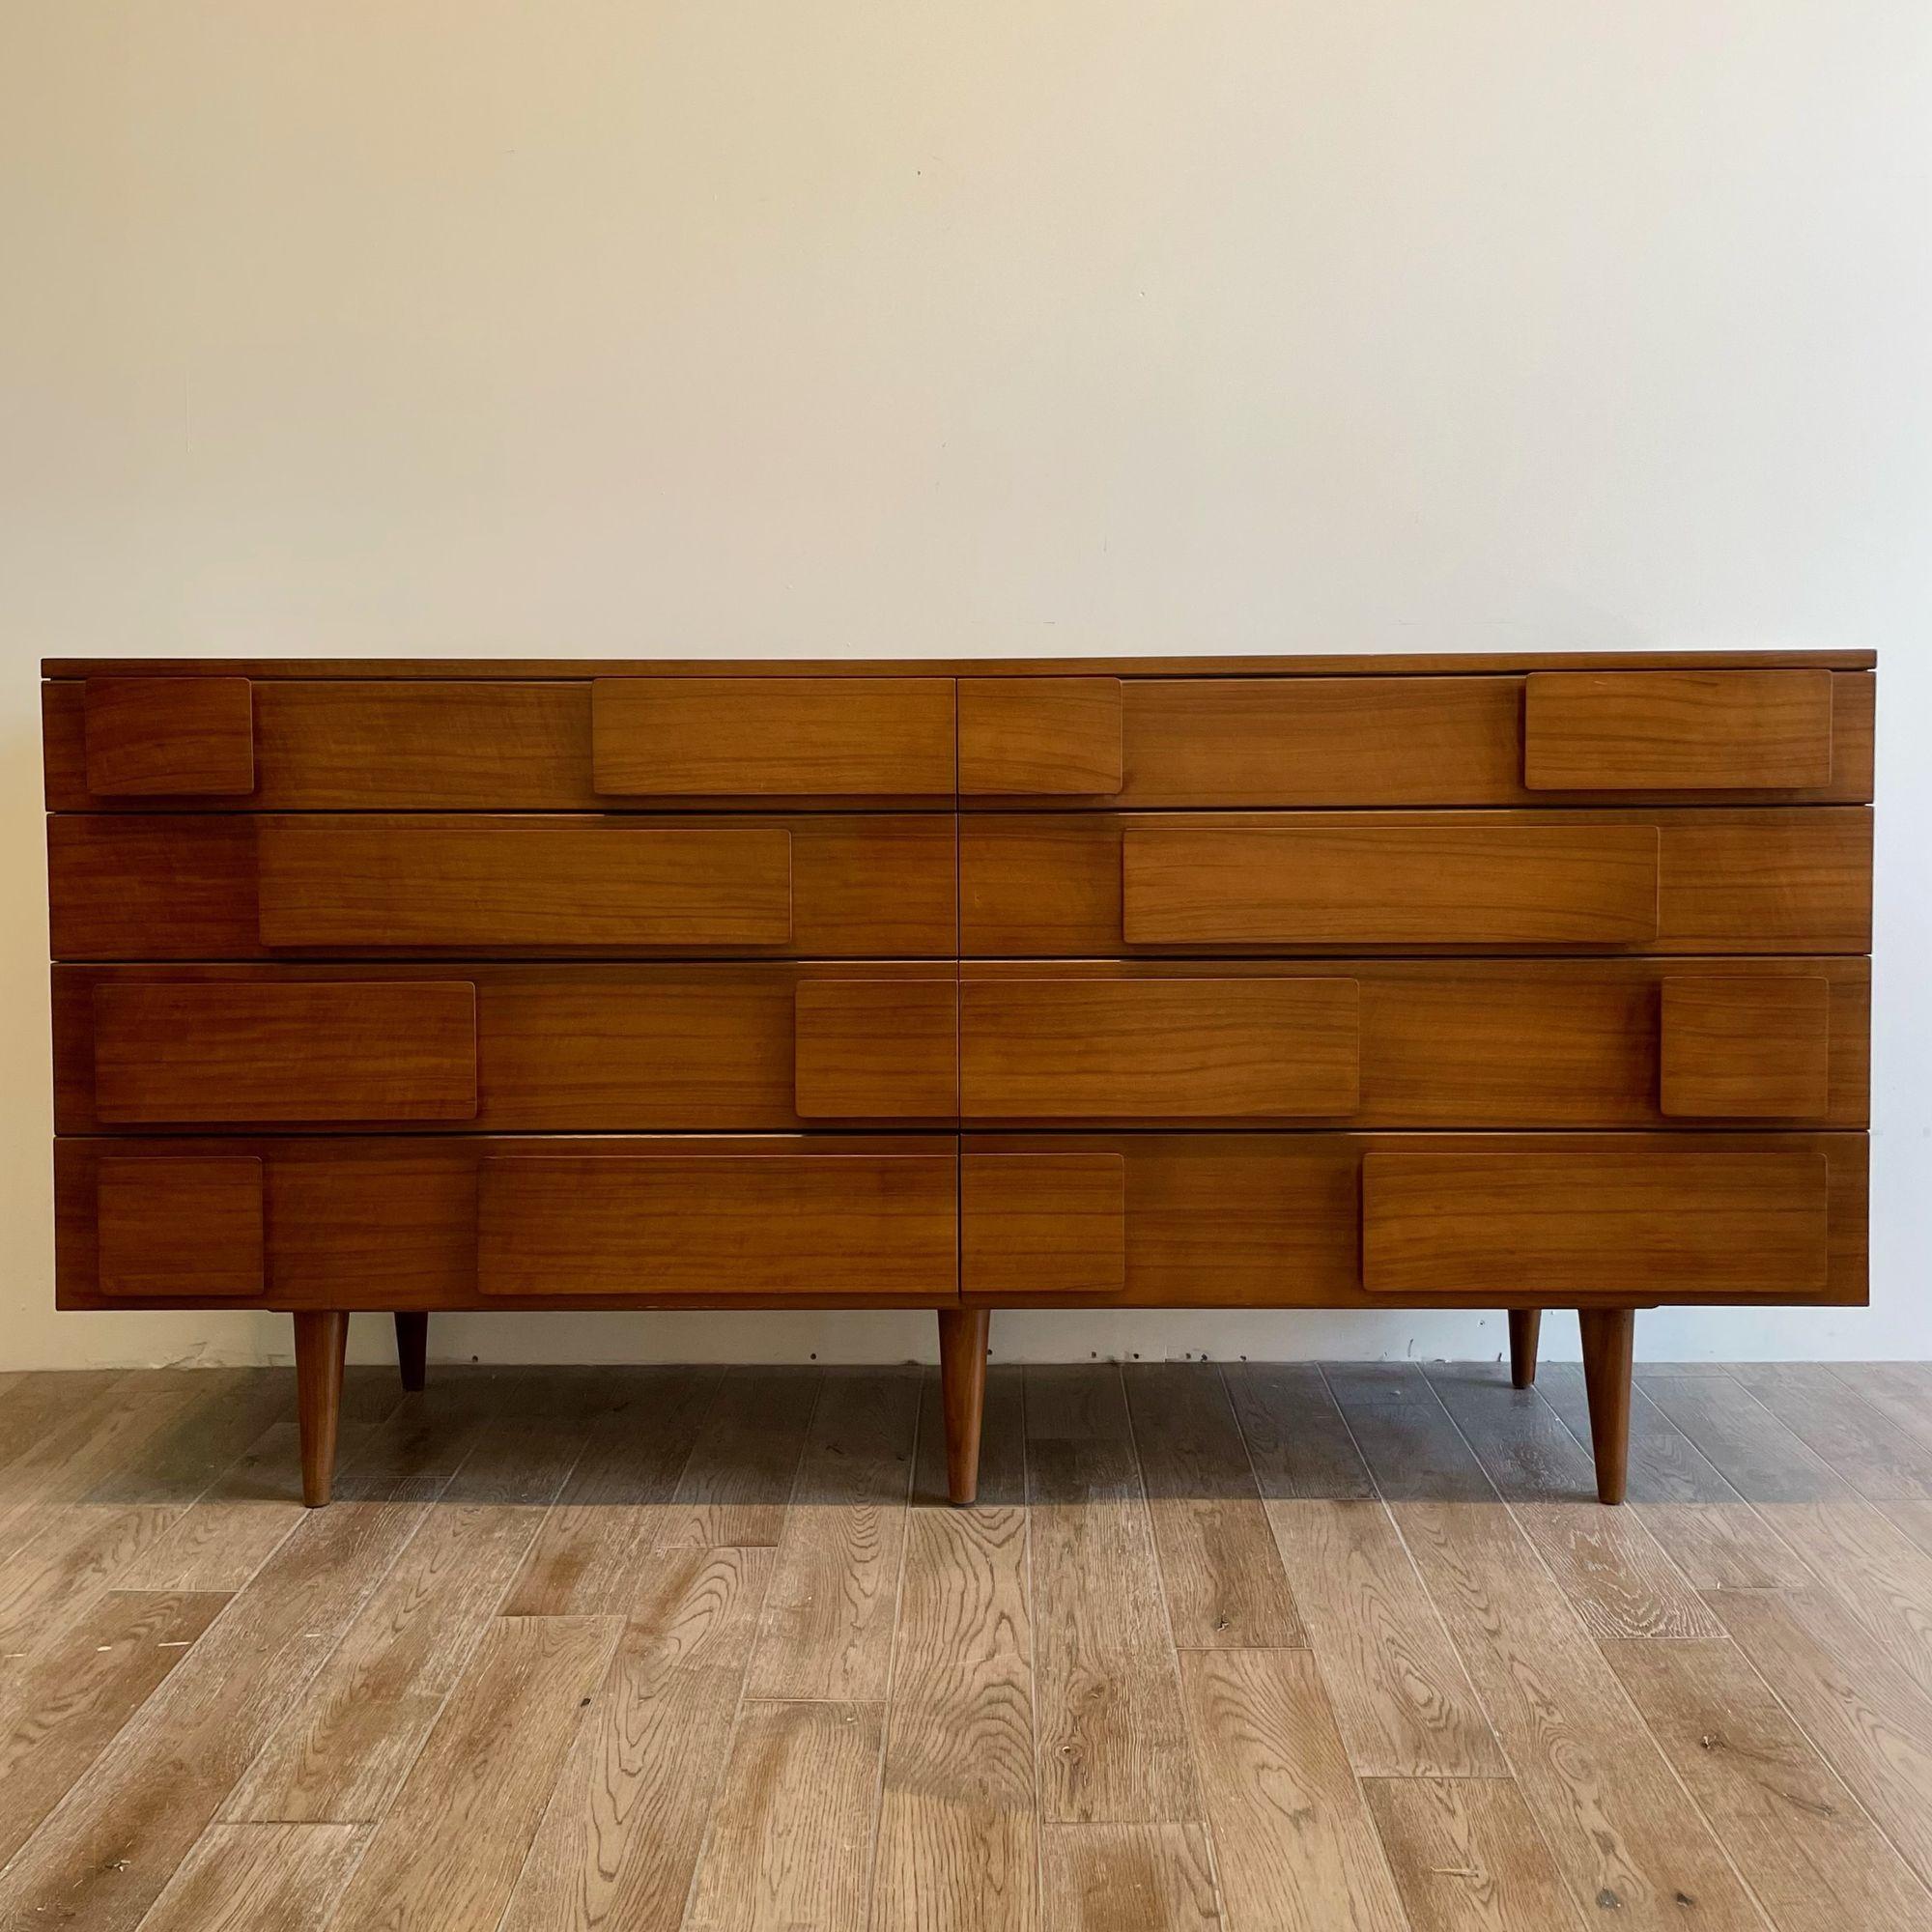 Gio Ponti double dresser / chest labeled singer and Sons Model 2161

An iconic and rare double dresser / cabinet. Designed by Gio Ponti in his signature style where the grips of the drawers form a highly modernist ornamentation. Production of